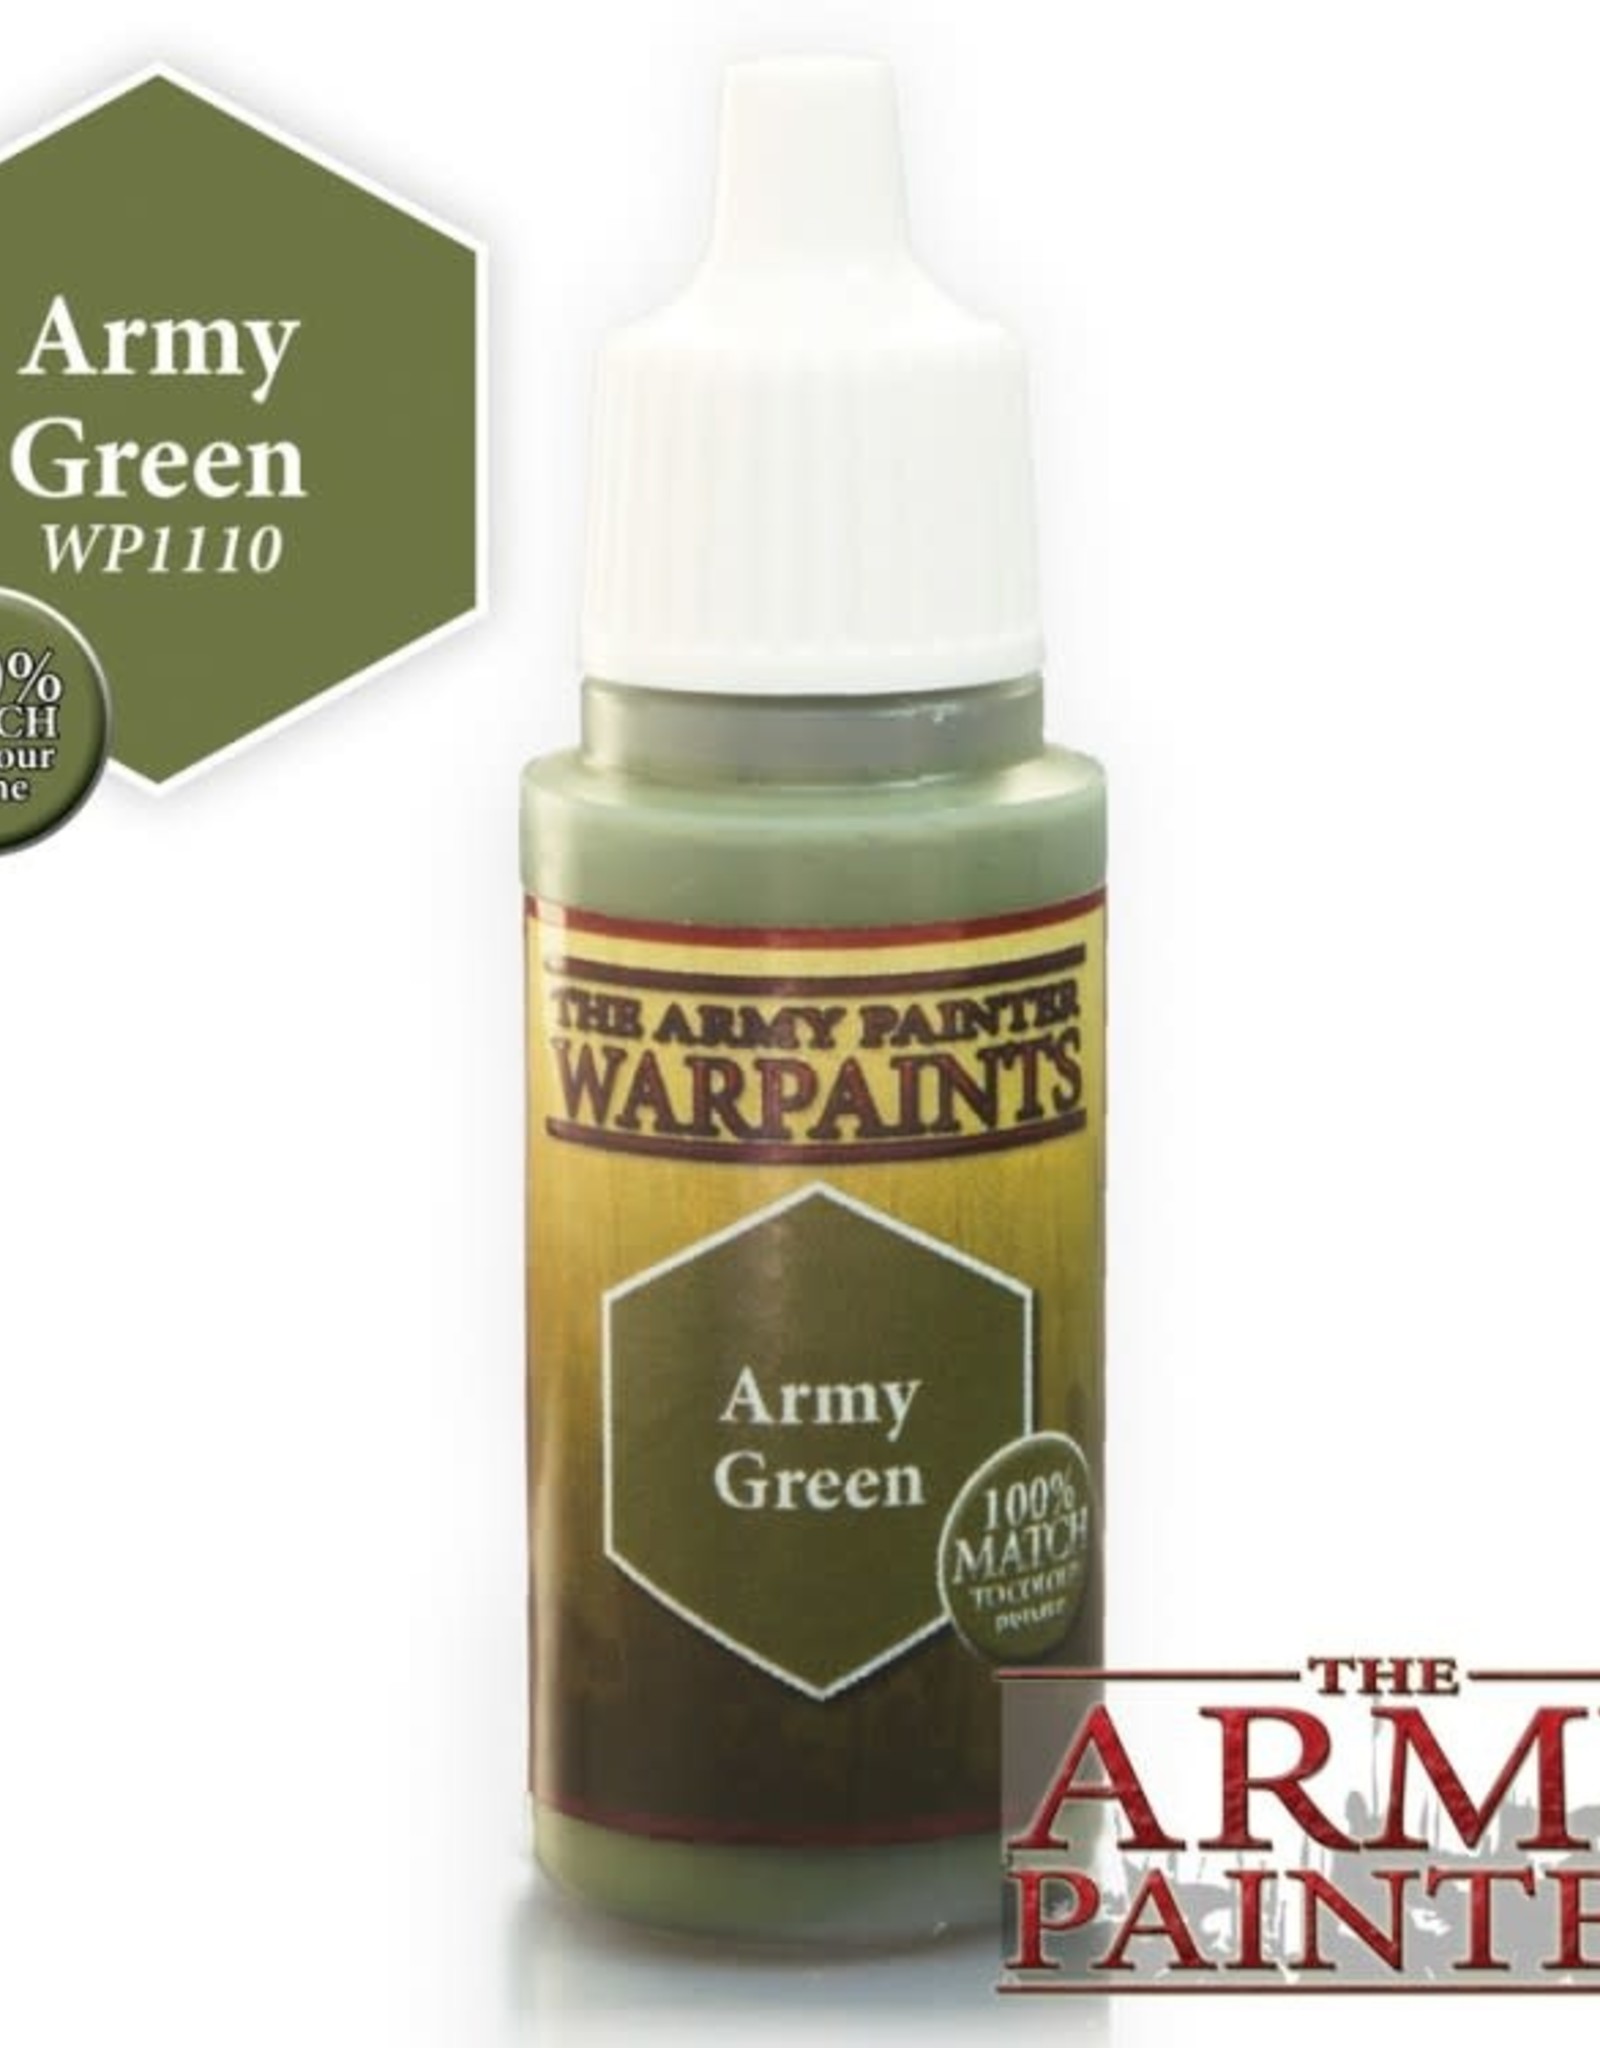 The Army Painter Warpaints - Army Green